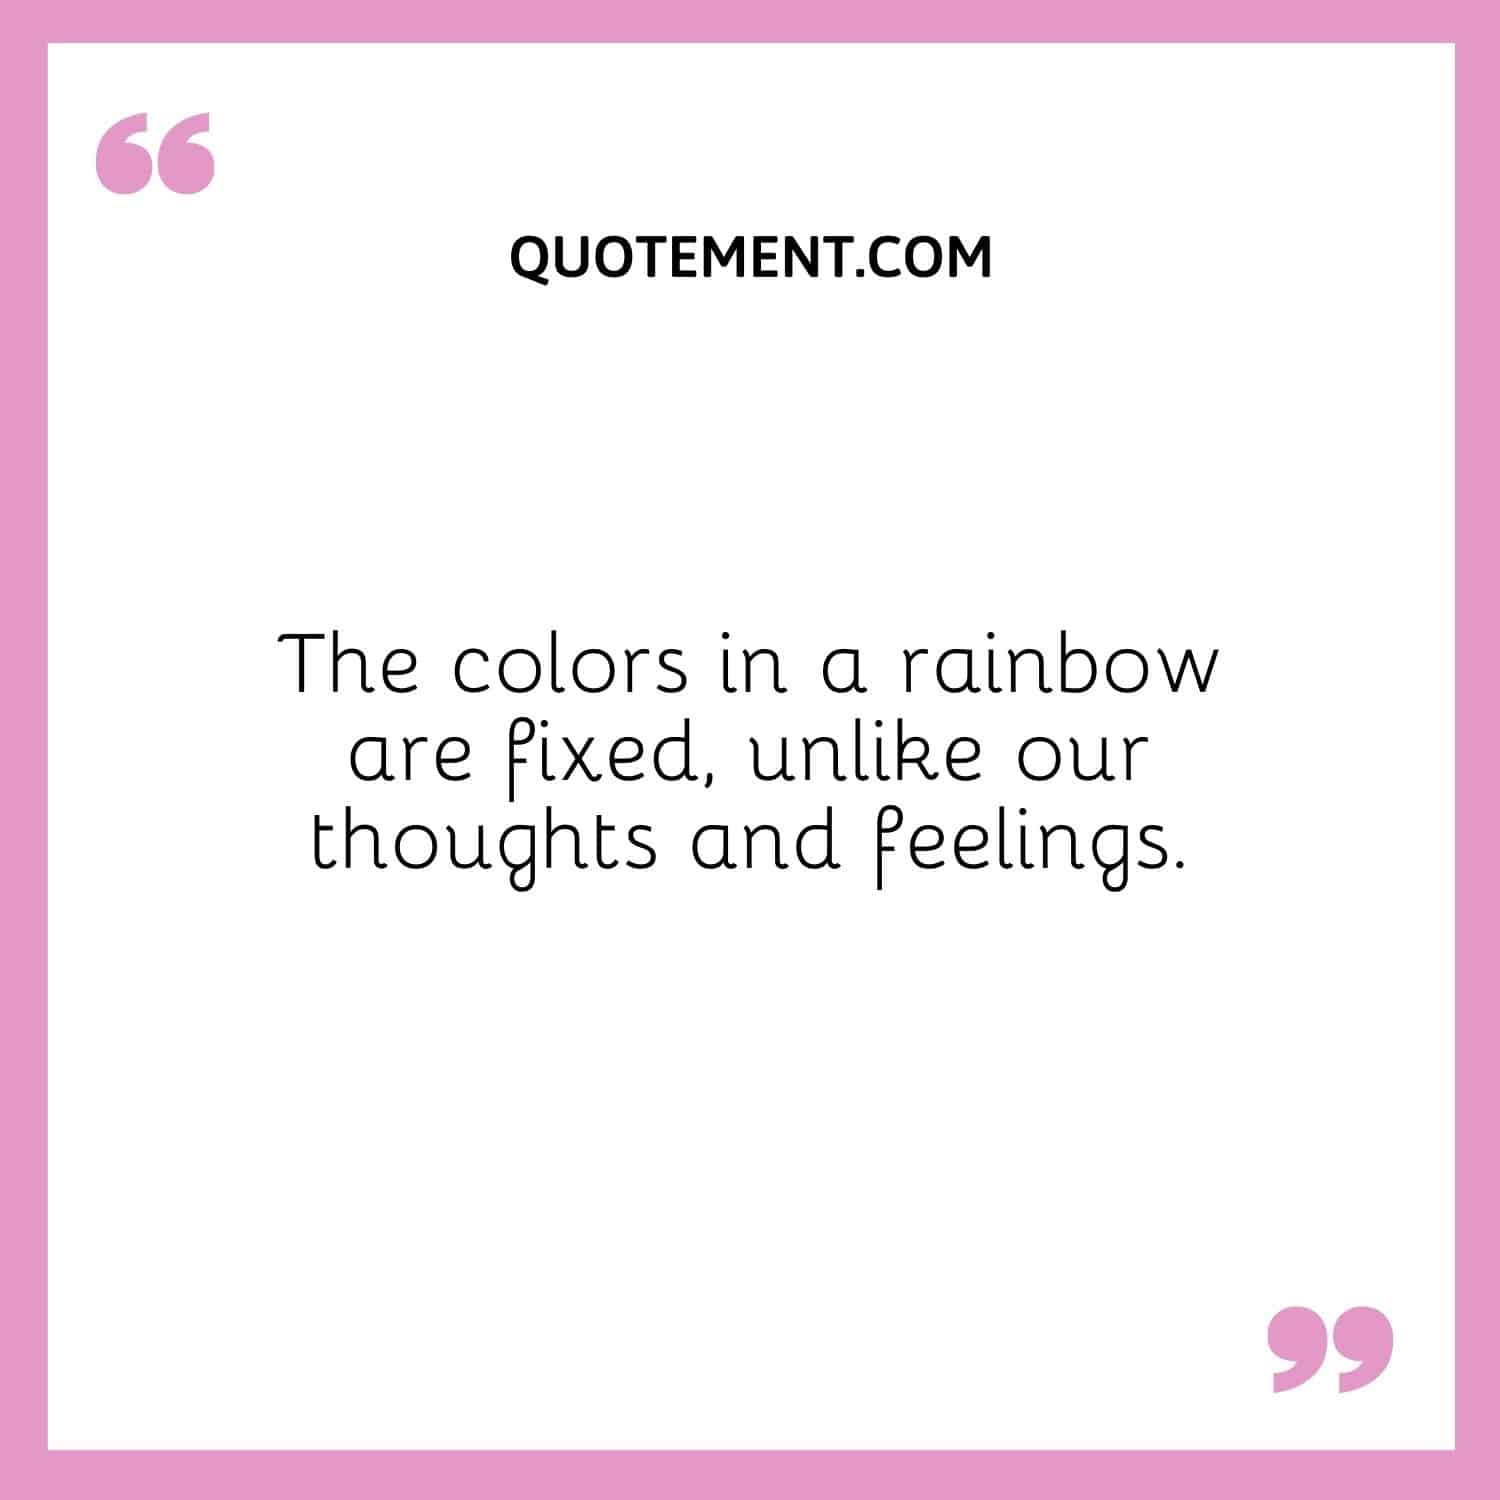 The colors in a rainbow are fixed